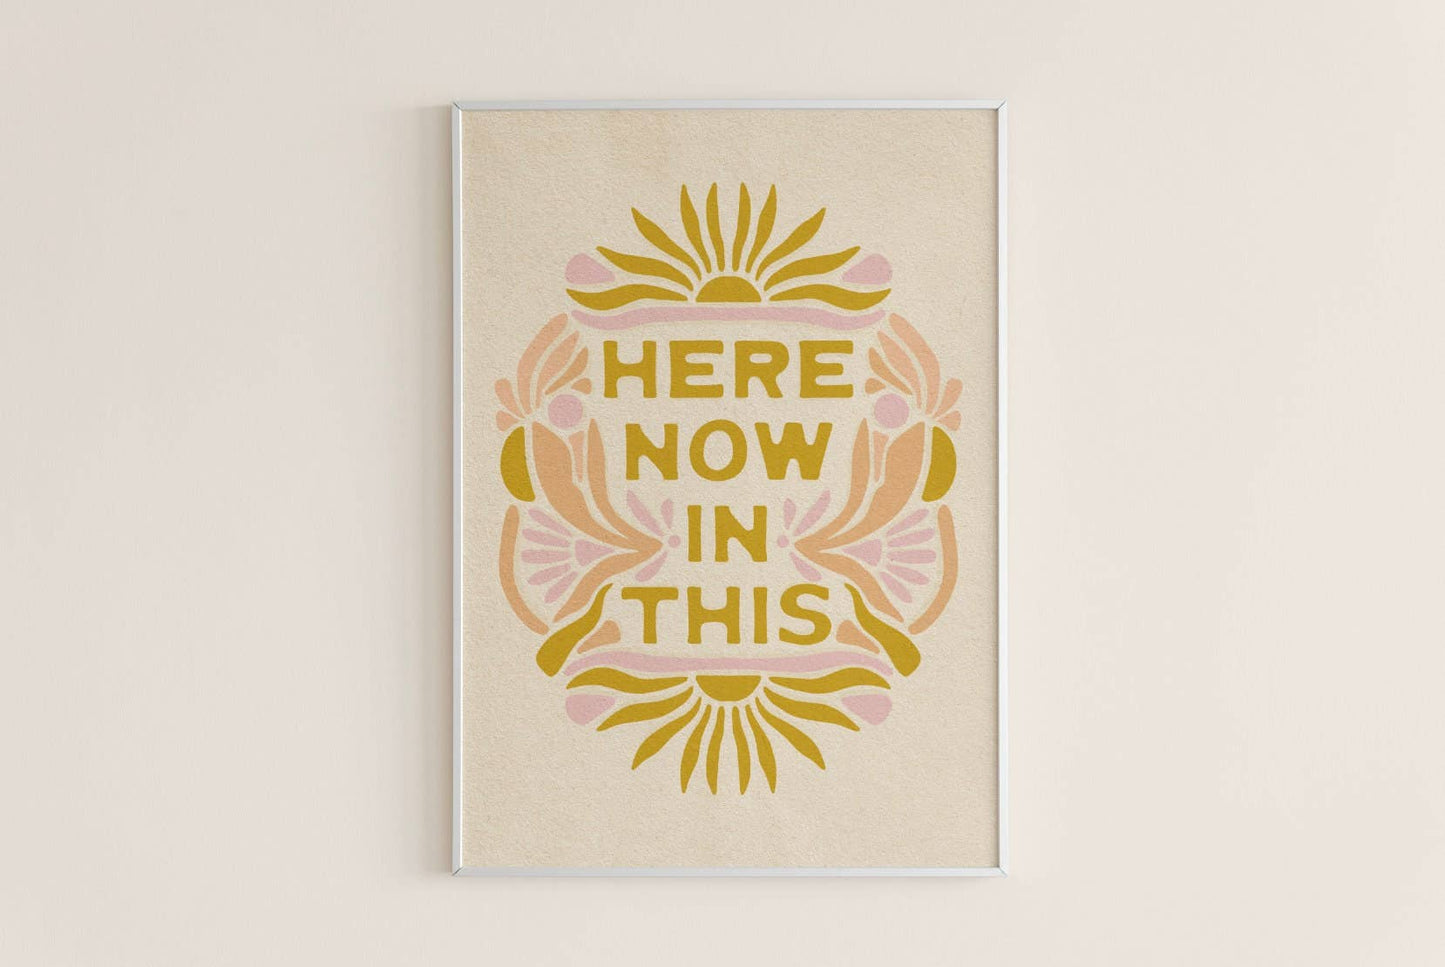 The SoulShine Co. - Here Now In This, Technicolor - Art Print: 5x7